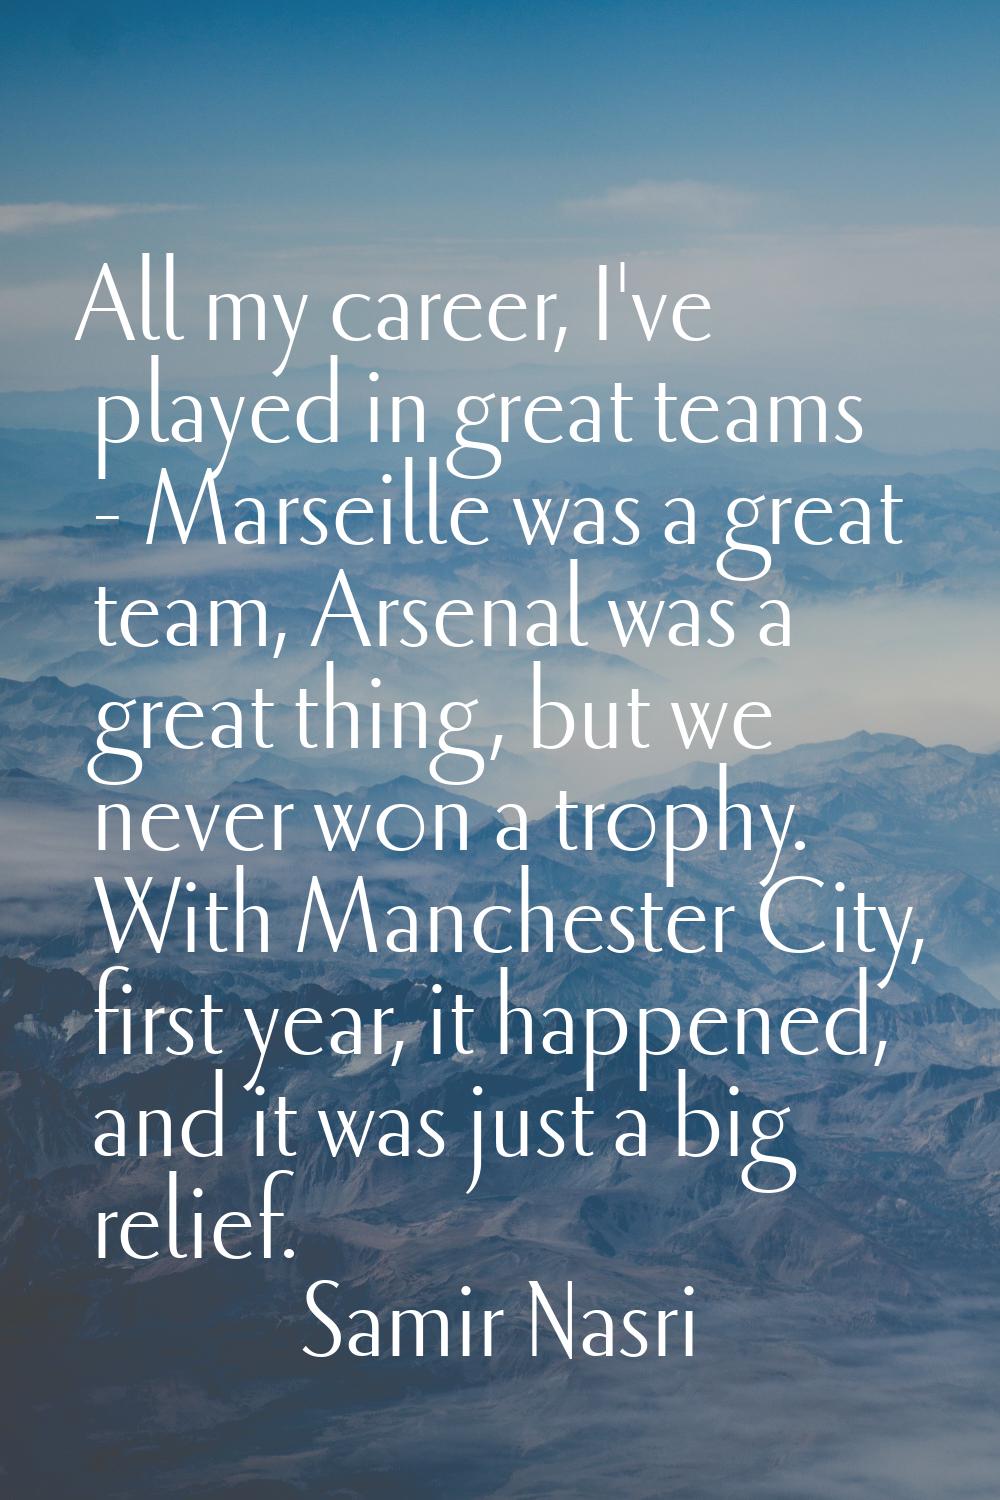 All my career, I've played in great teams - Marseille was a great team, Arsenal was a great thing, 